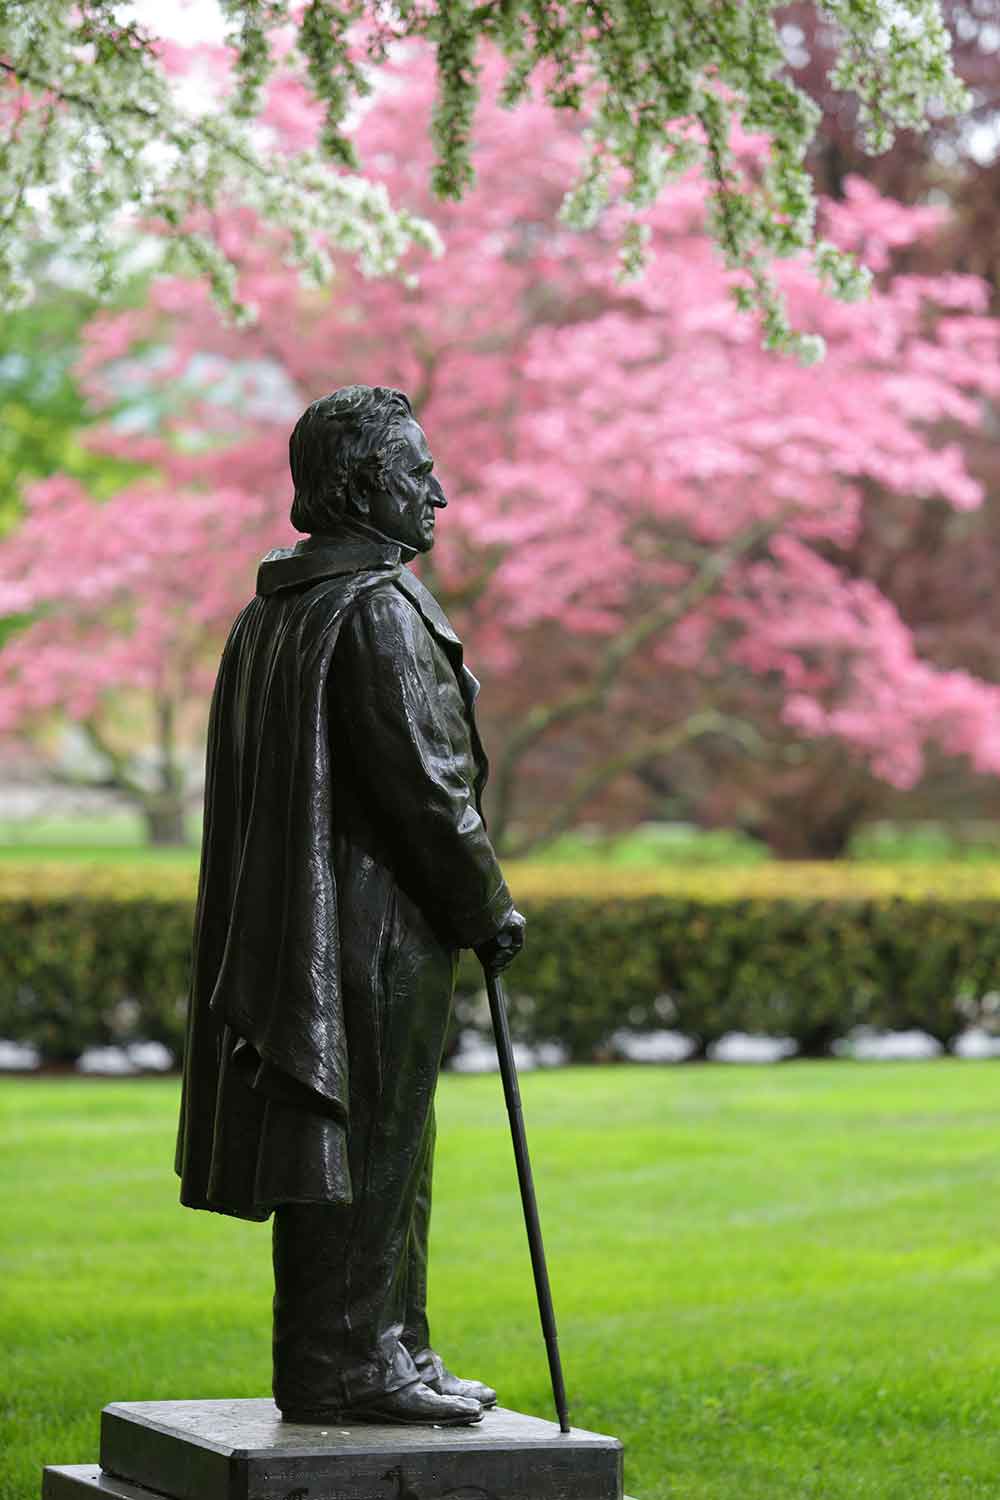 A black metal statue of Matthew Vassar stands in a grassy area with pink trees, visible in the background. The statue is in profile, wearing a cloak and carrying a cane.